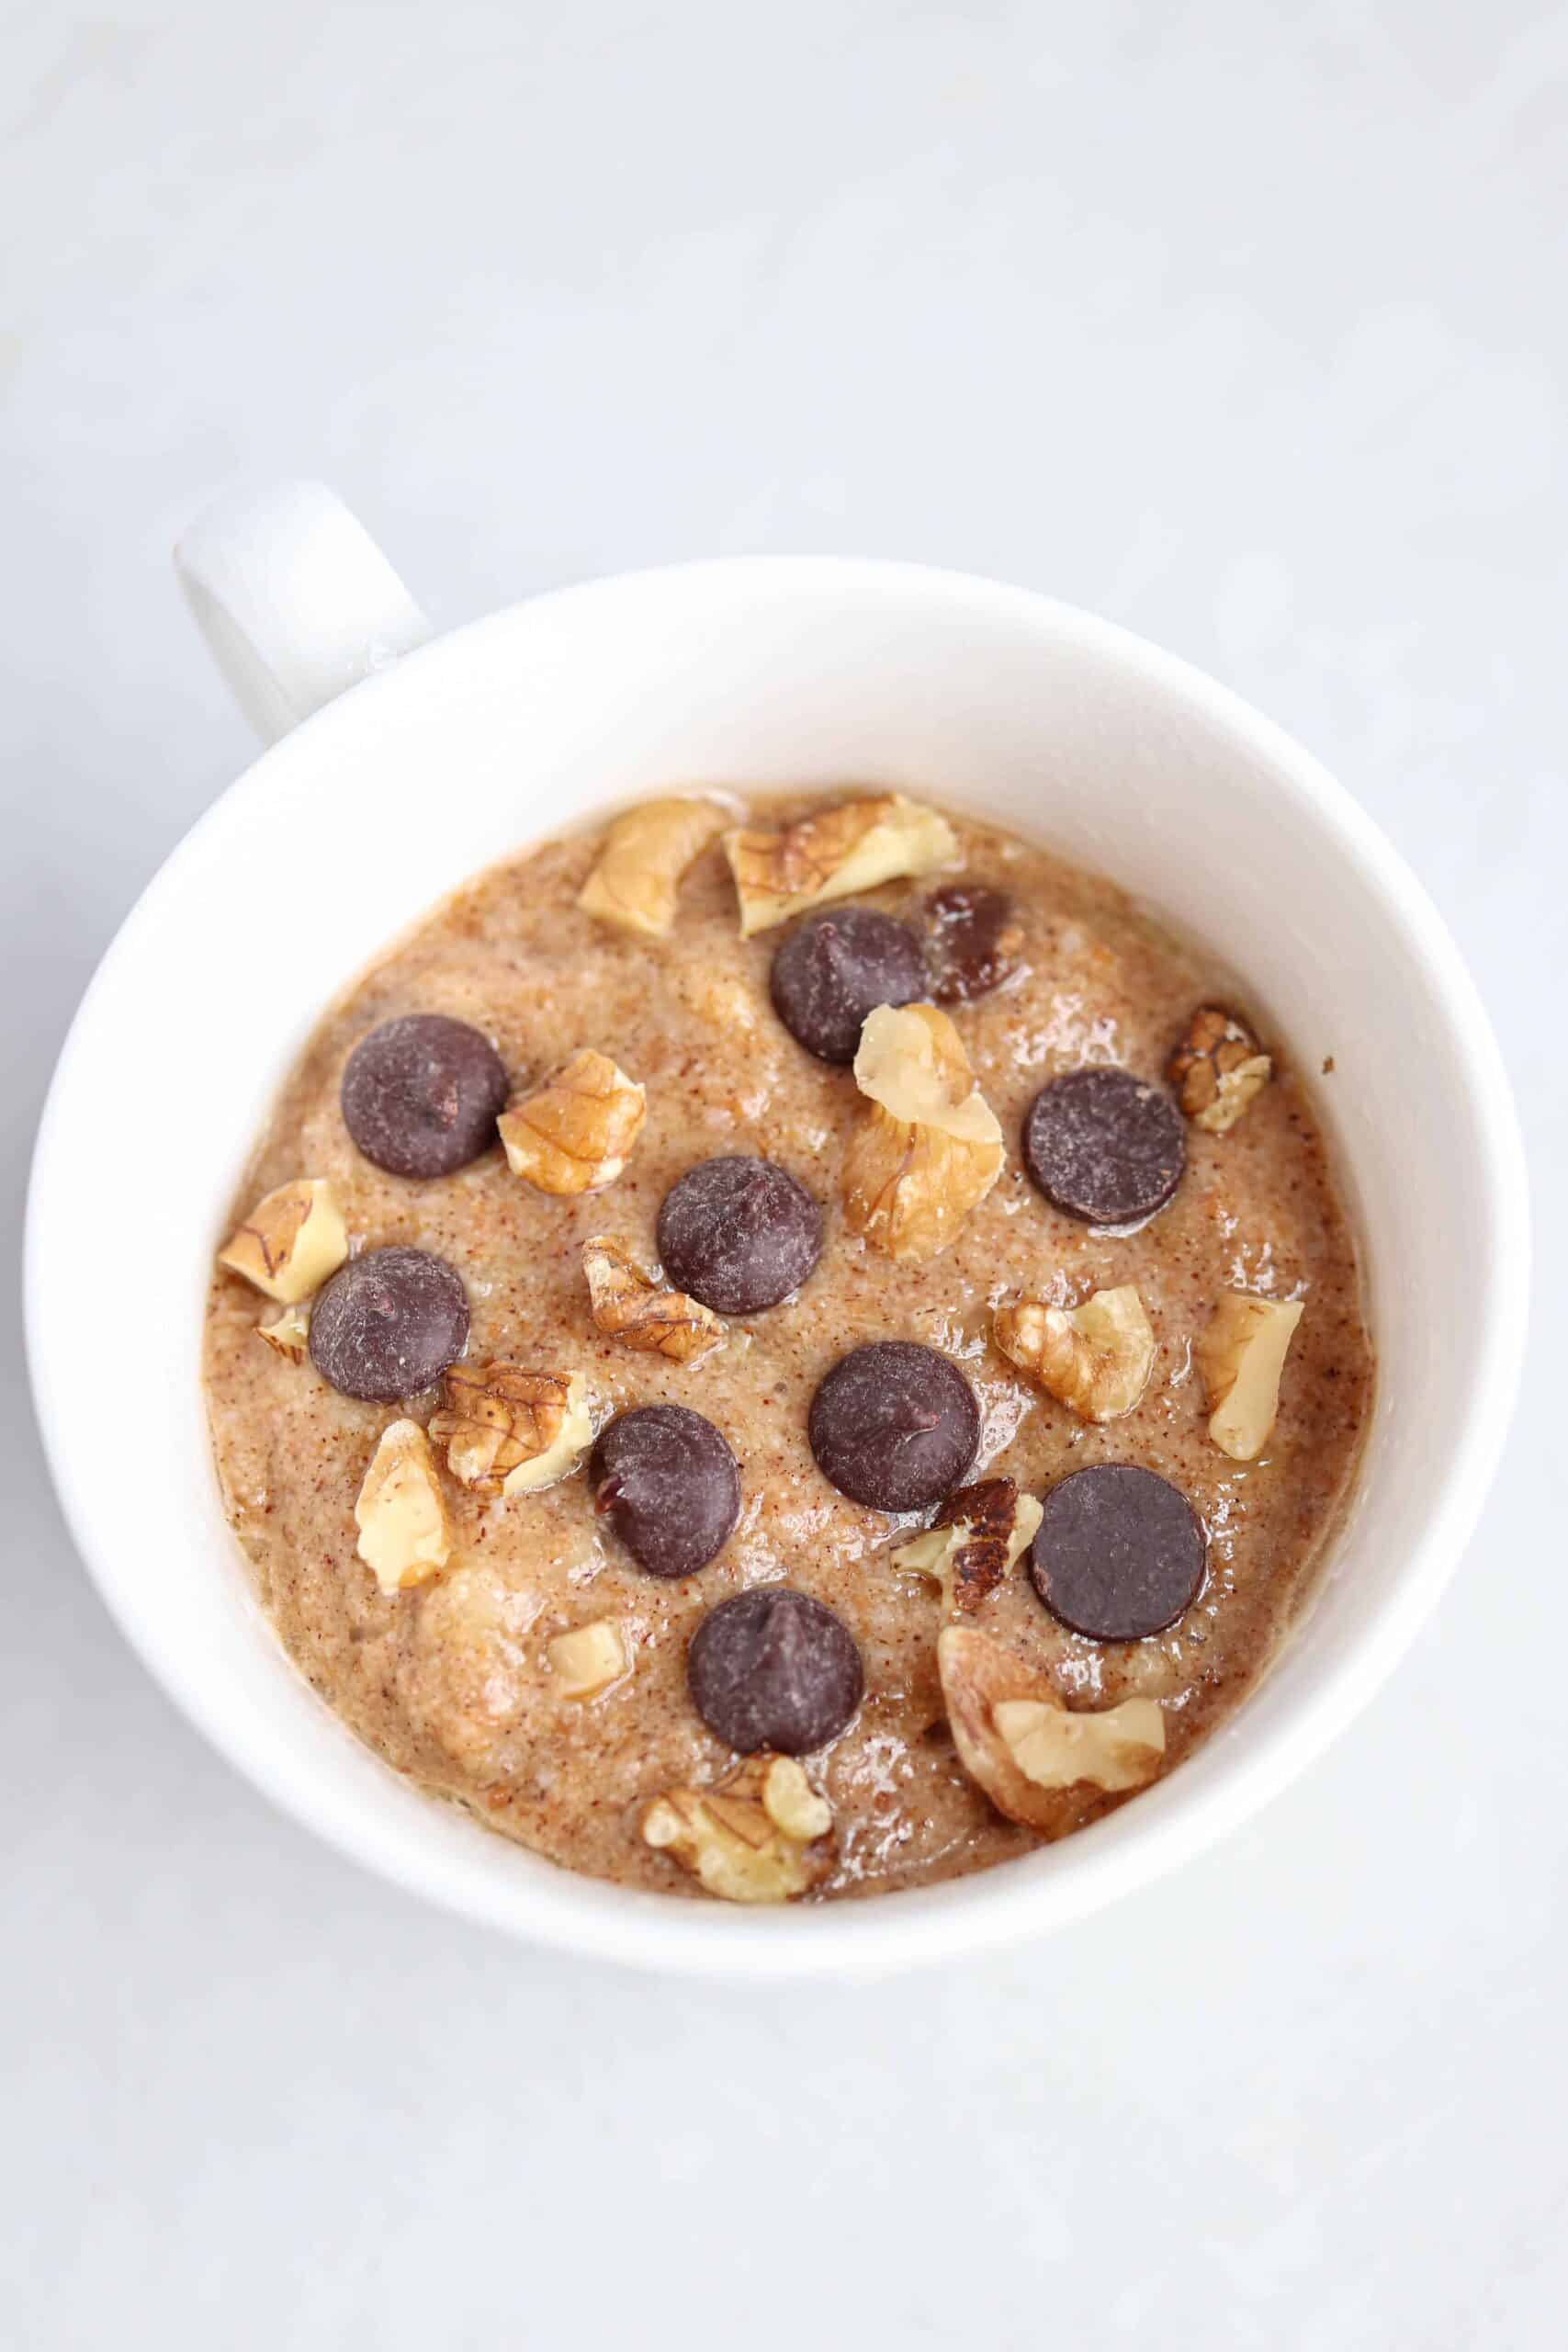 banana mug cake topped with walnuts and chocolate chips before cooking.